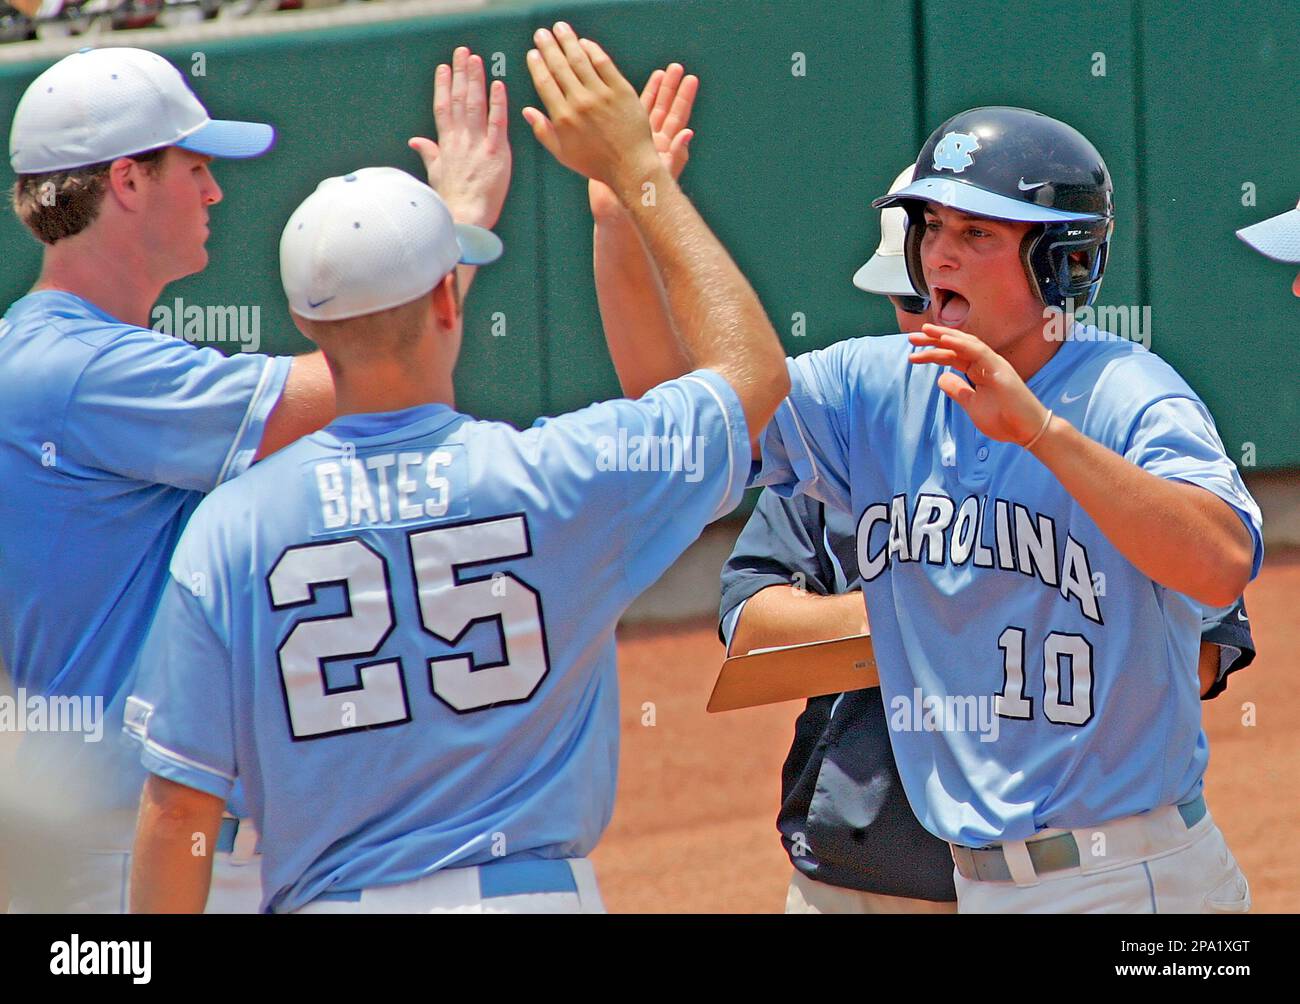 North Carolina's Kyle Seager (10) is congratulated on scoring a run during  the second inning against Coastal Carolina by teammates Colin Bates (25)  and Brett Thomas at a Super Regional NCAA college